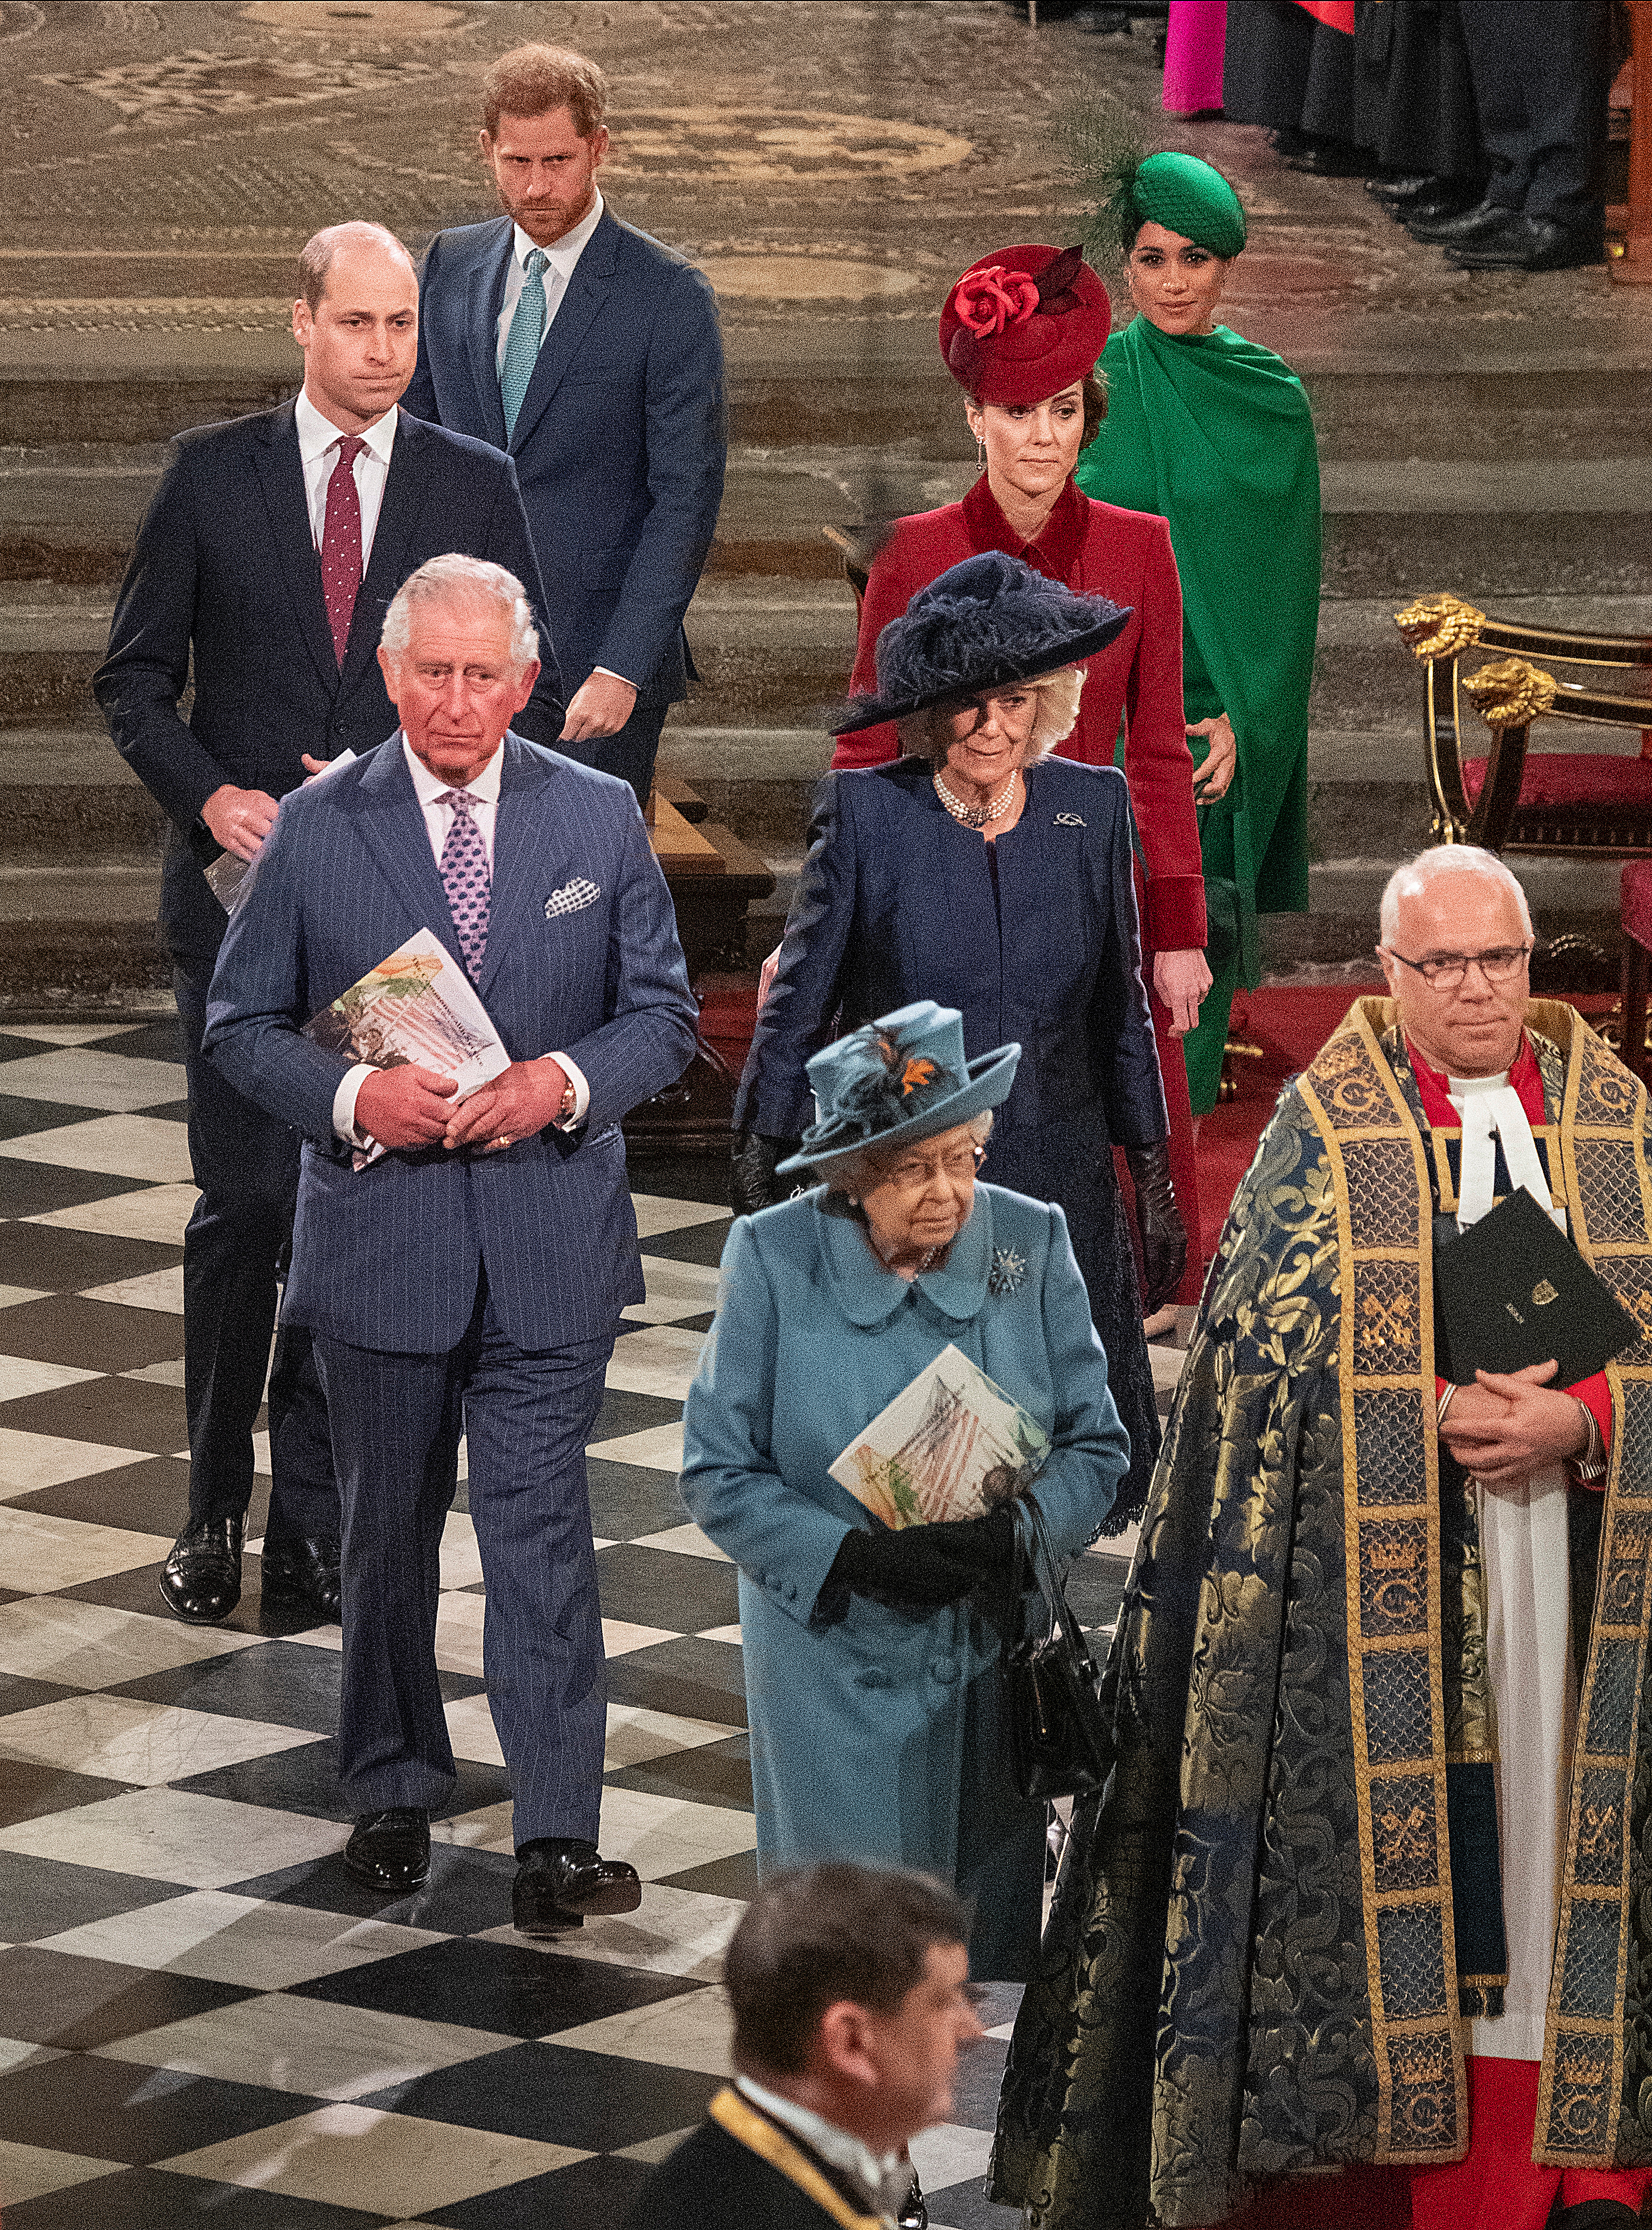 Queen Elizabeth II, Prince Charles, Camilla, Prince William, Duchess of Cambridge, Prince Harry and Meghan Markle attend the annual Commonwealth Service at Westminster Abbey in London, Britain on March 9, 2020 It was the Dukes of Sussex's last official act with the Royal Family (Reuters)